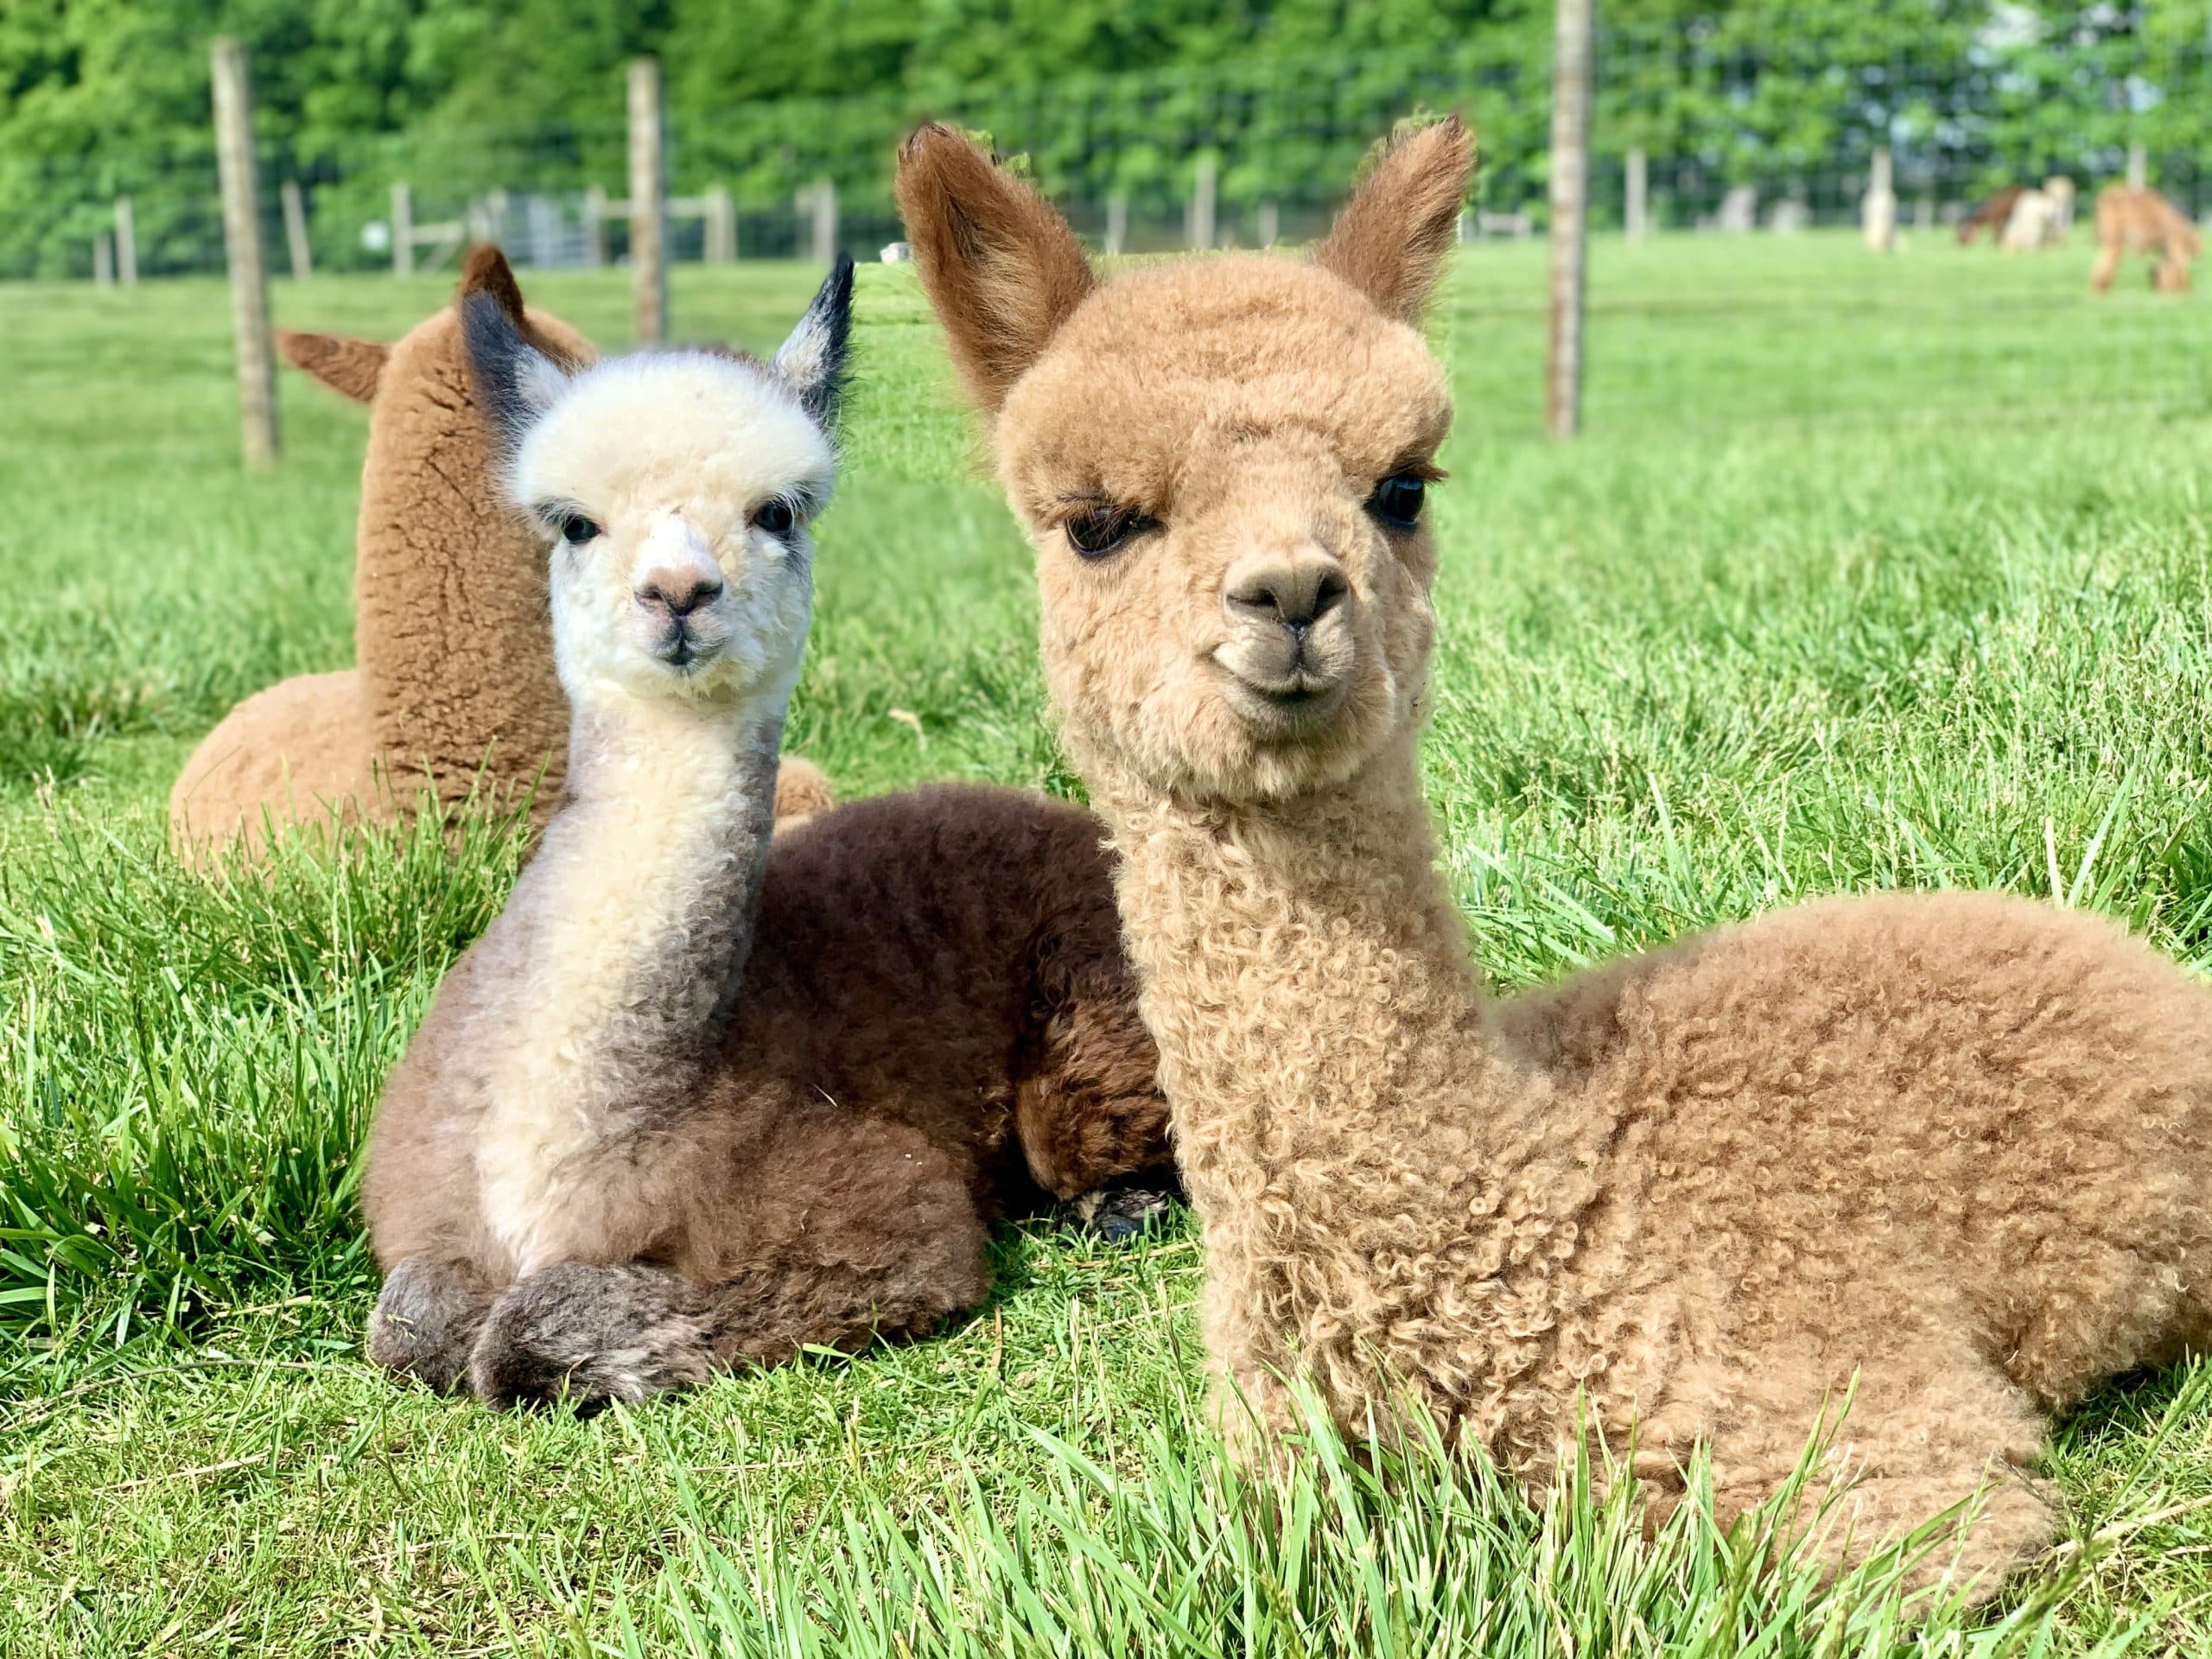 horizontal photo of 3 alpacas laying in a grassy field, 2 tan colored and one brown and white